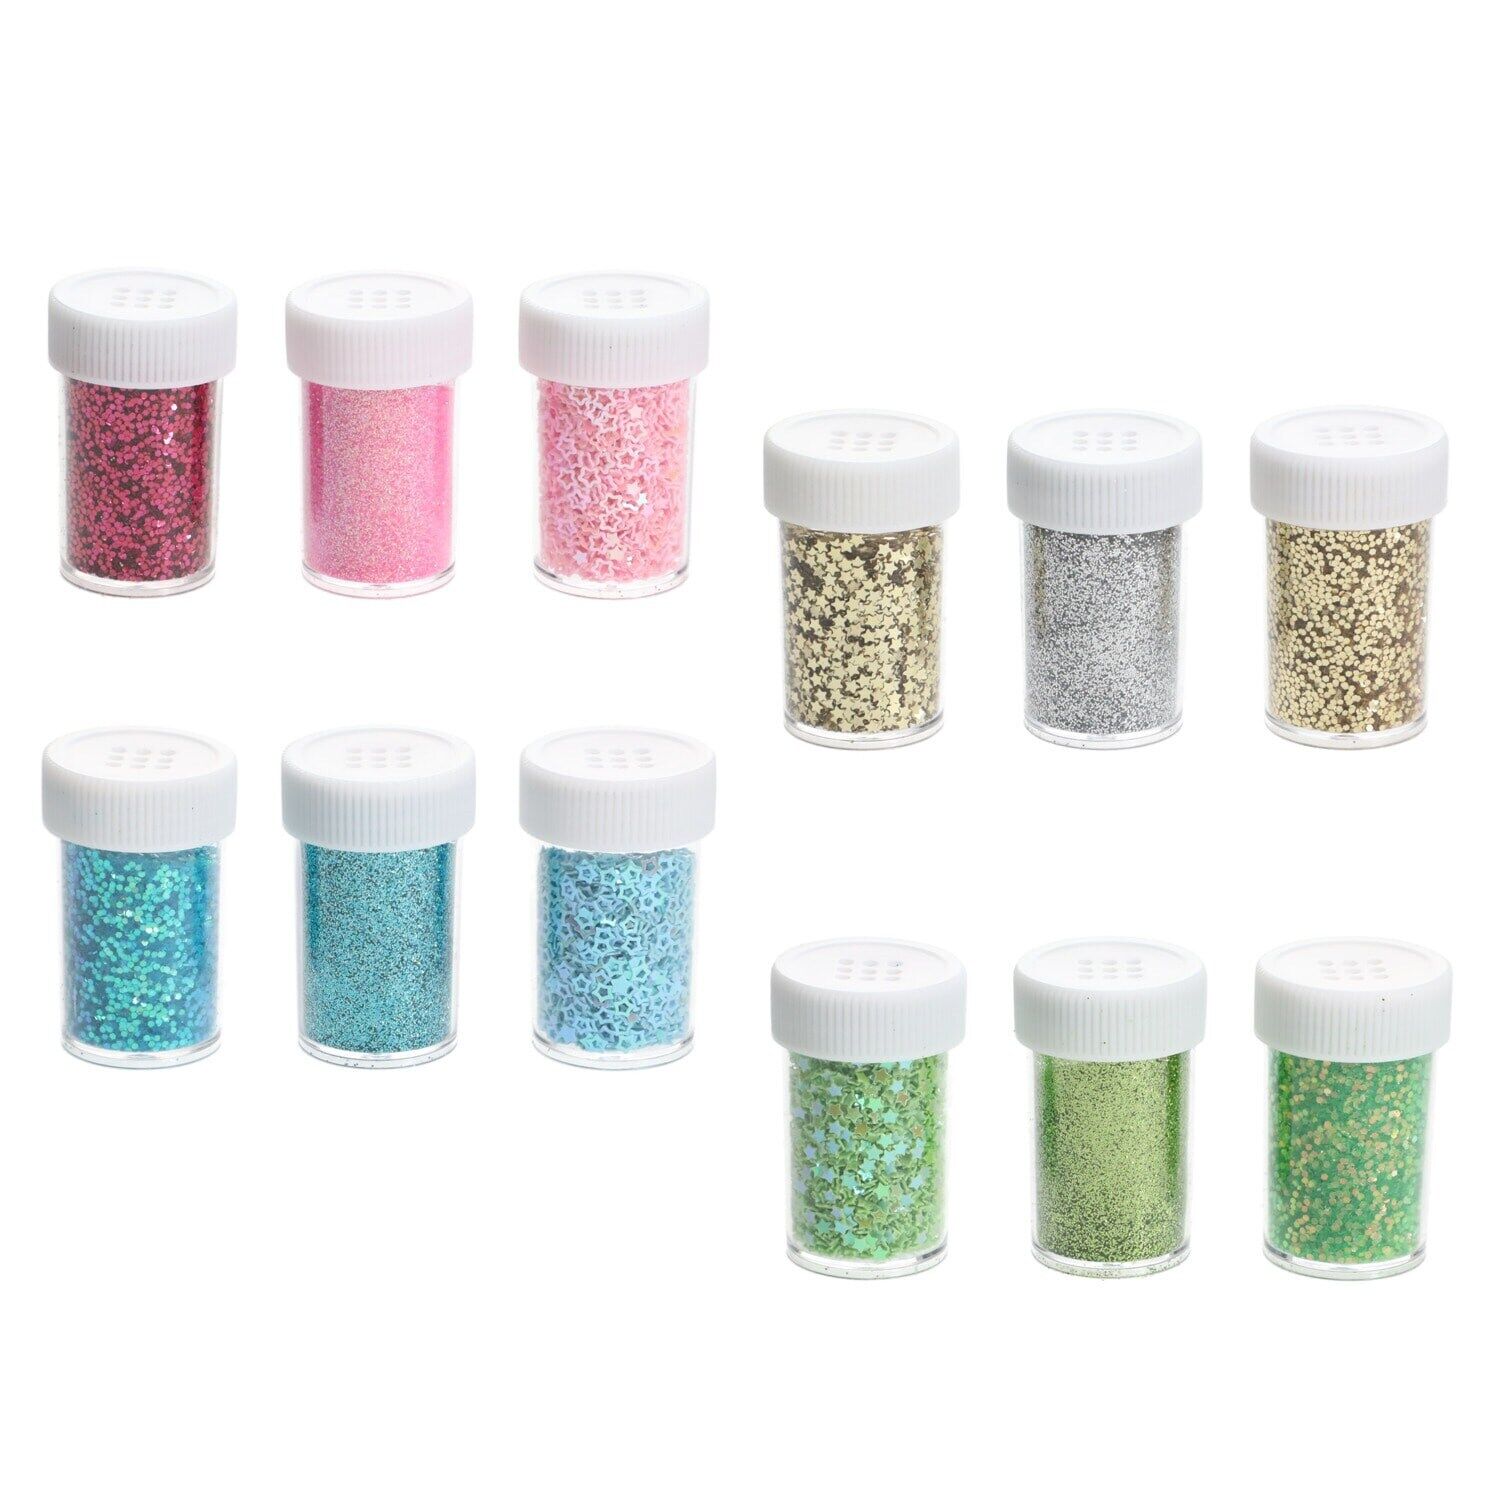 Crafter's Square Glittery Sequin Pots, 3-ct. (pack Of 36)